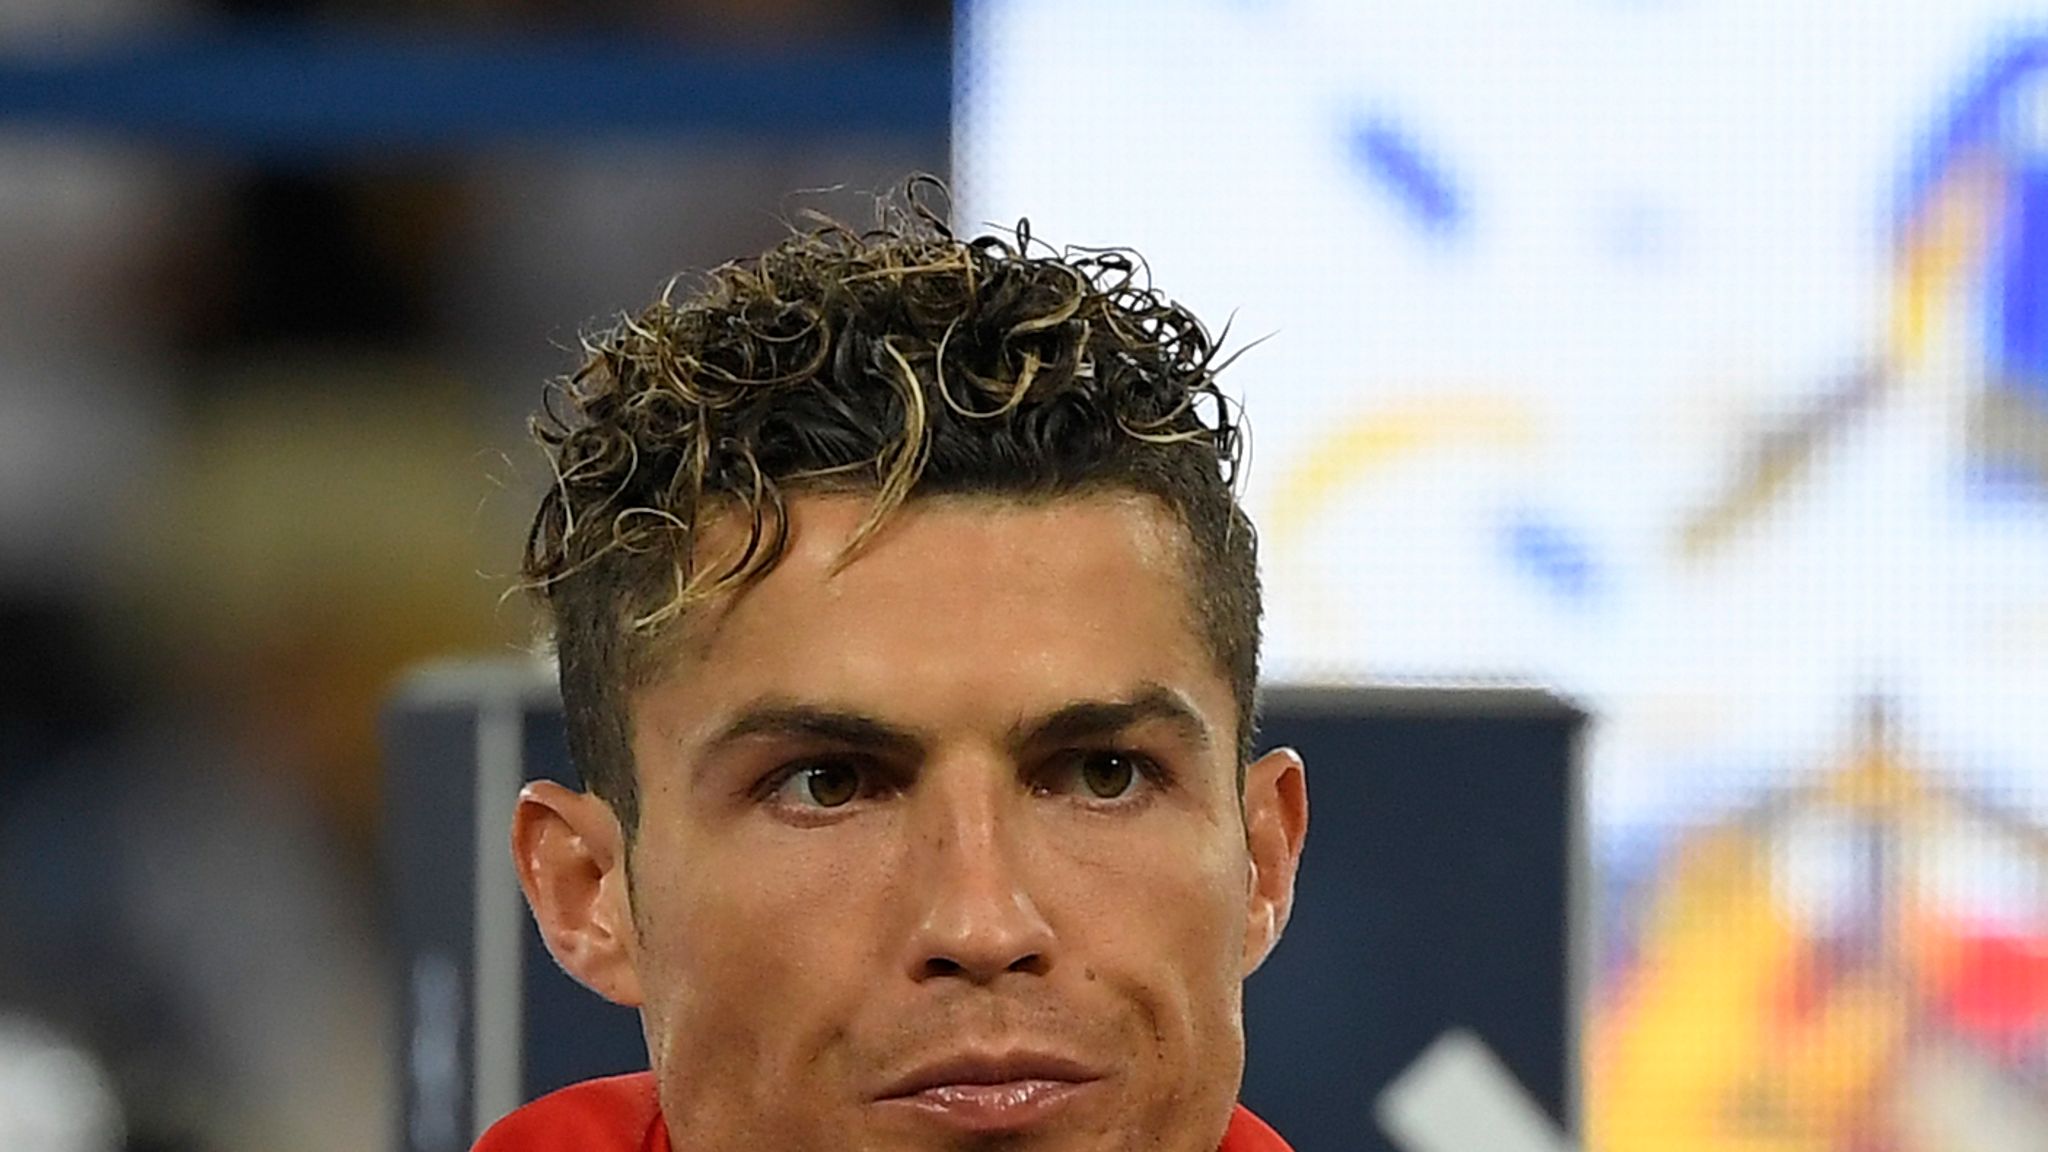 Real Madrid unfazed by row over Cristiano Ronaldos image rights  Cristiano  Ronaldo  The Guardian